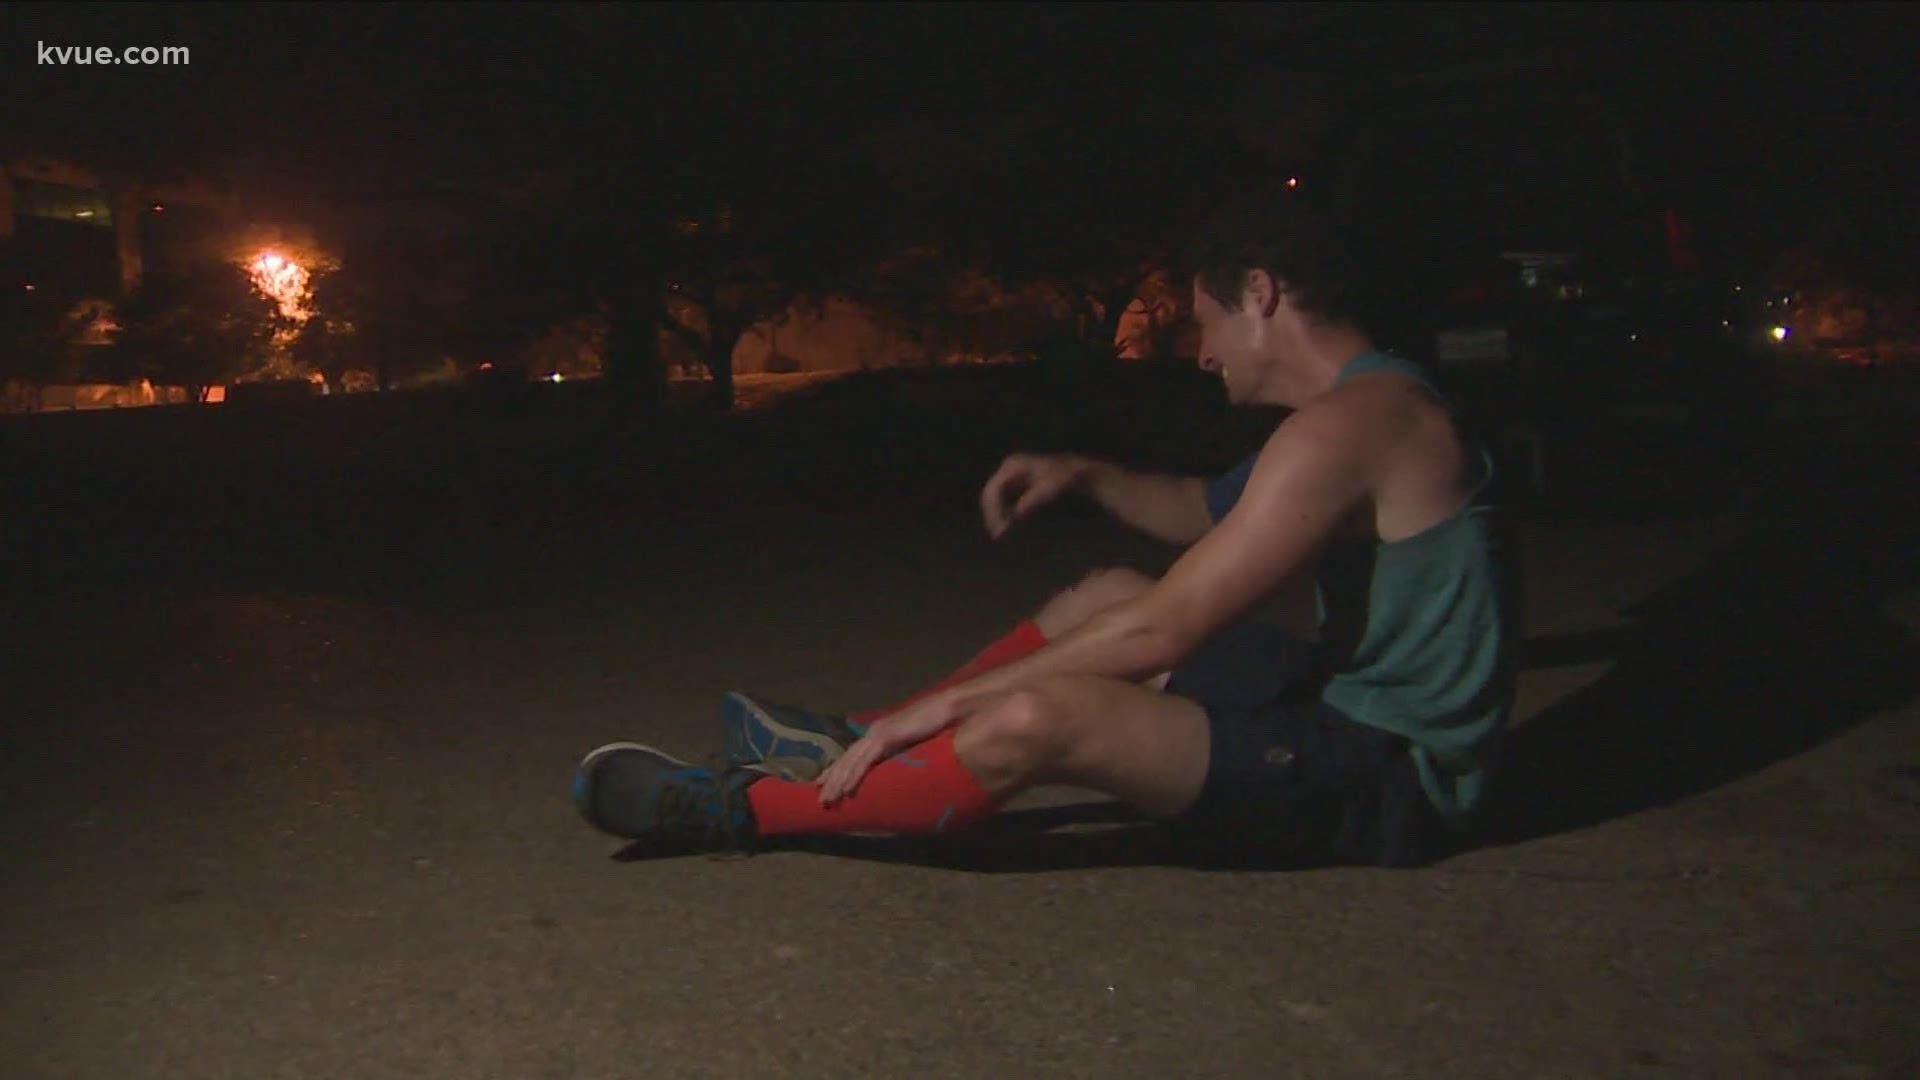 KVUE's Jake Garcia ran four miles every four hours for 48 hours to raise money for the Central Texas Food Bank.